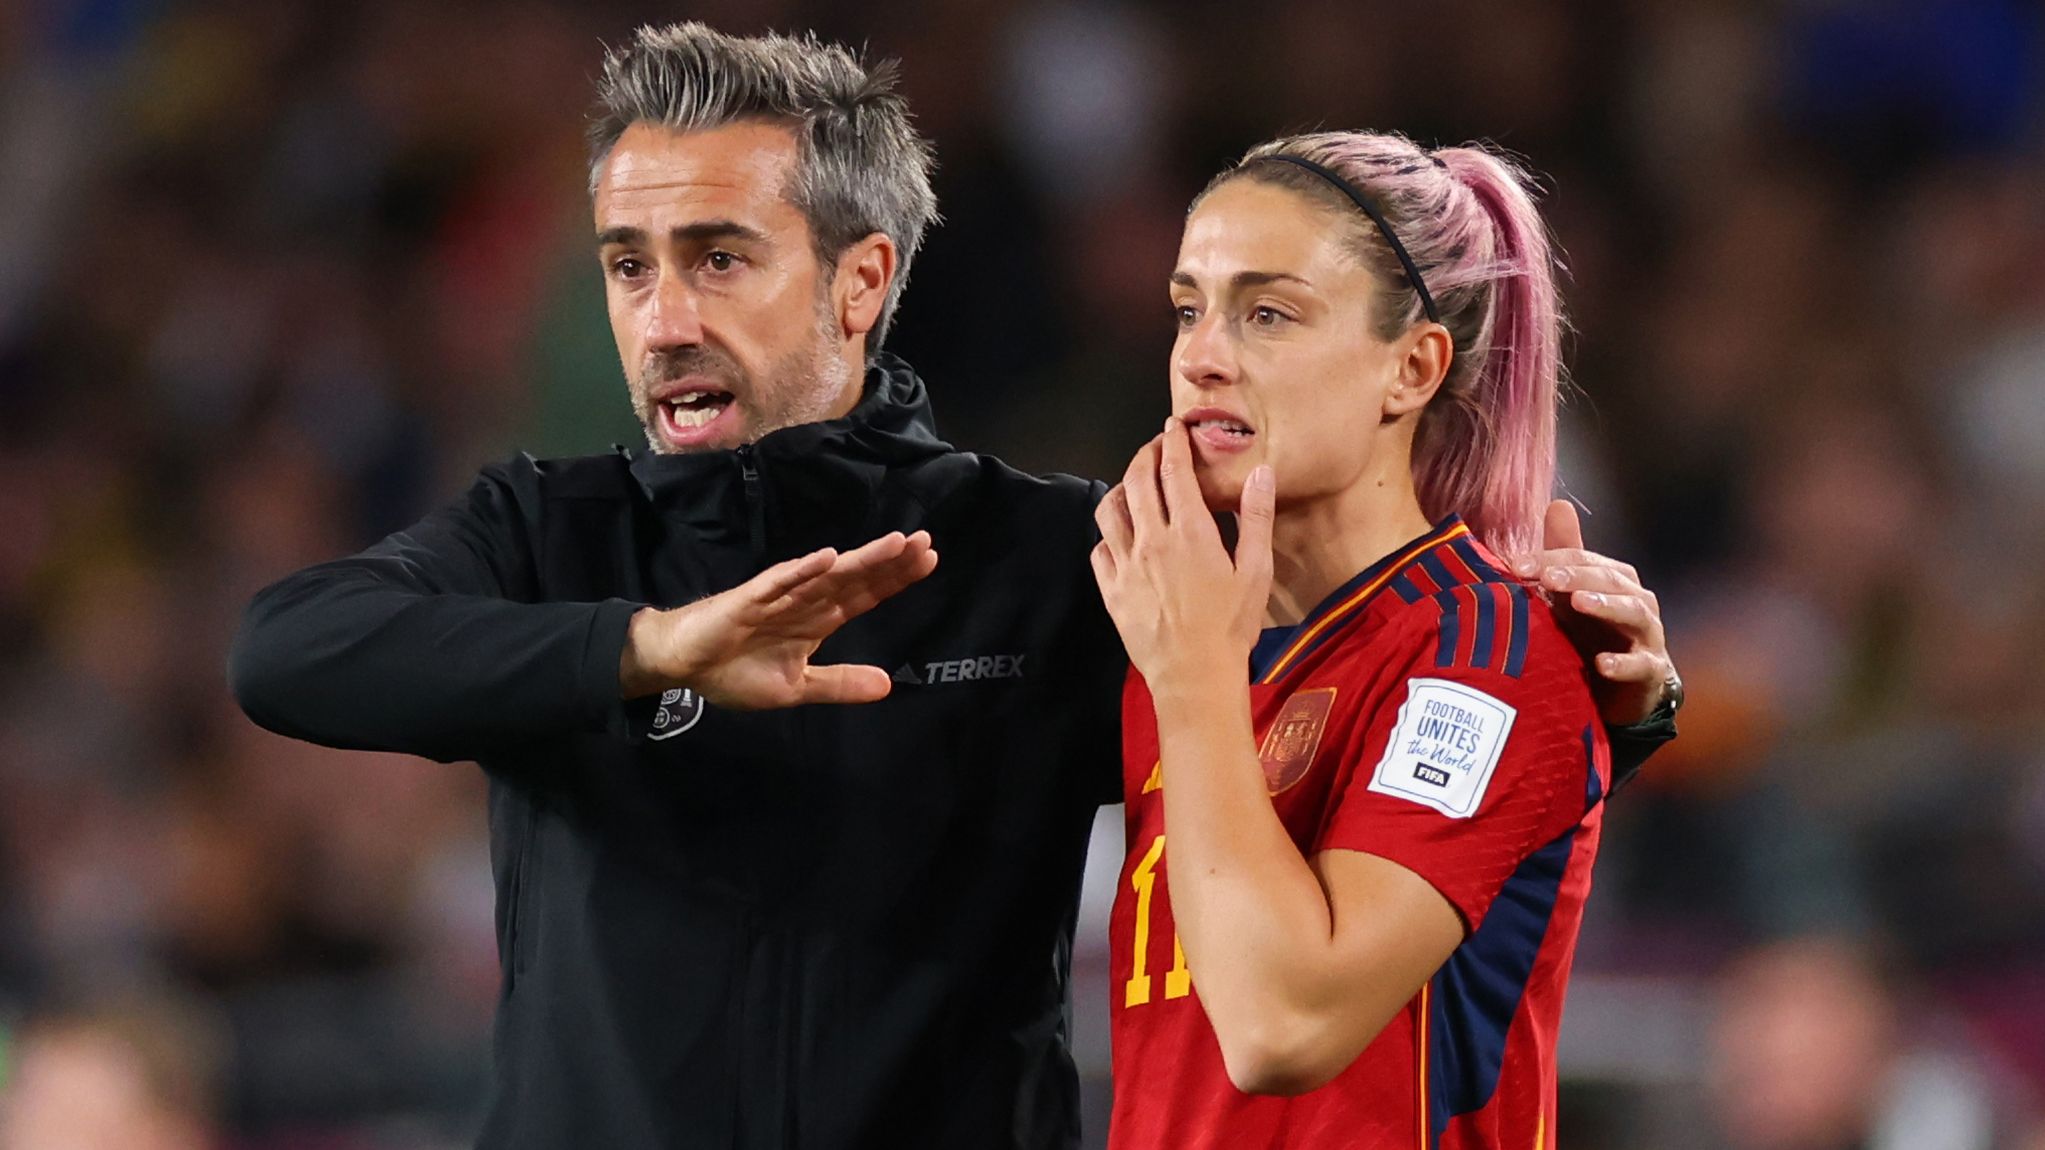 Coach in the firing line as wild fallout from Spain's Women's World Cup win continues